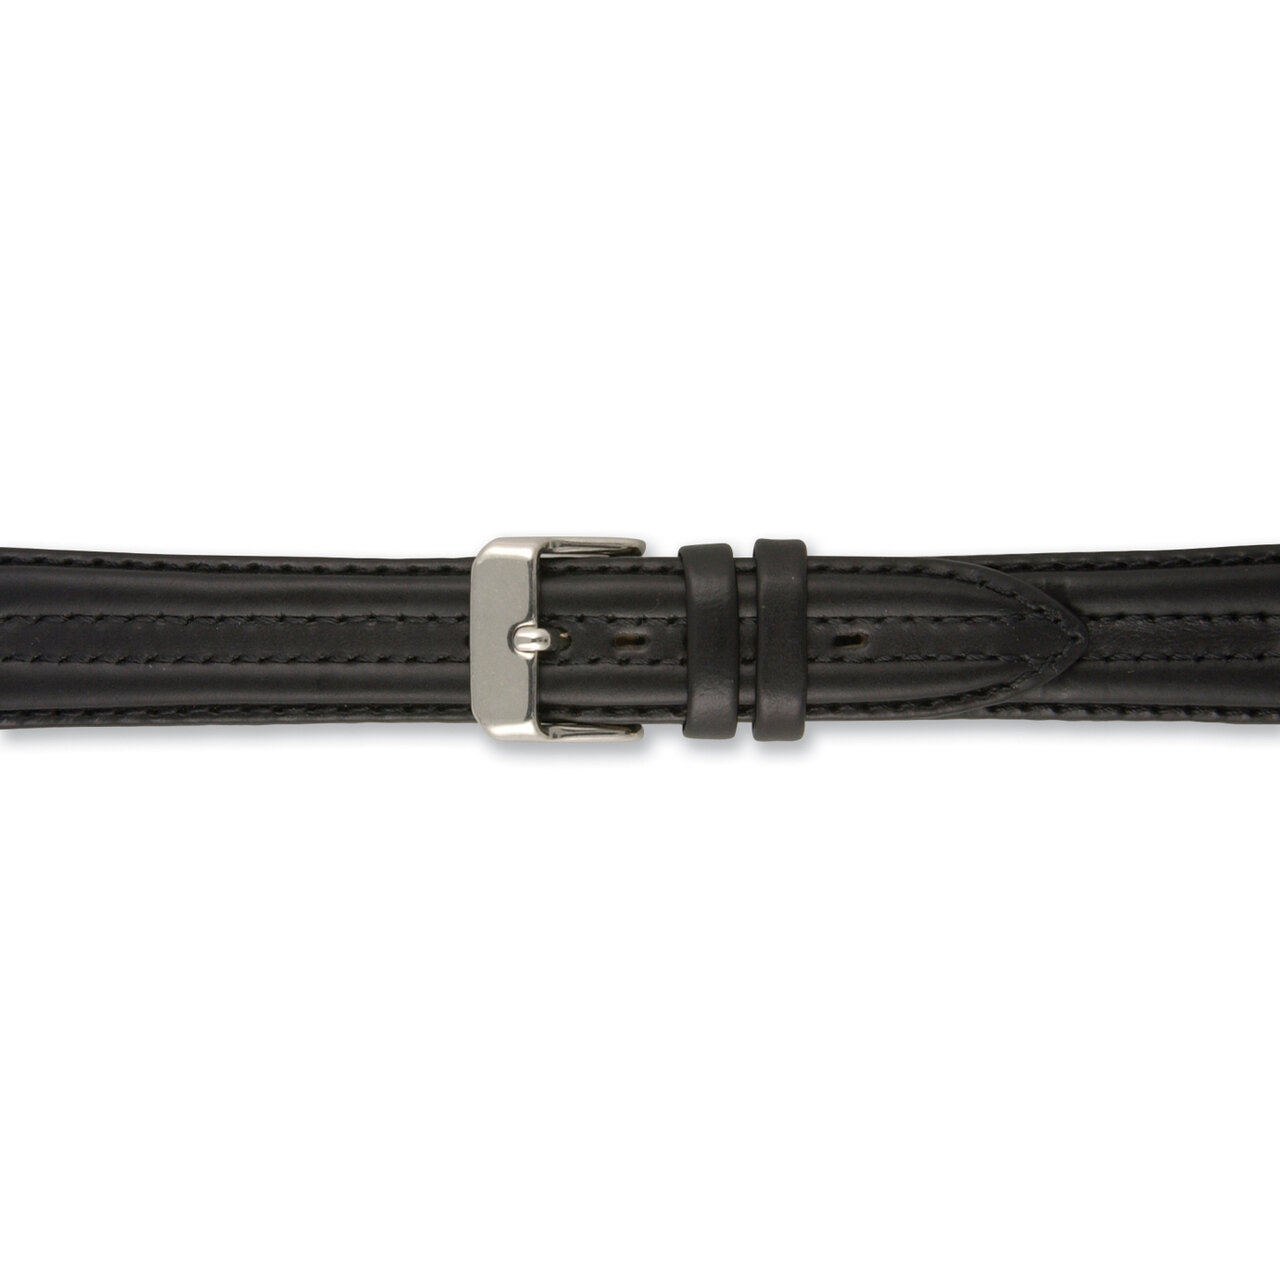 18mm Black Double Pad Oilskin Leather Watch Band BA340-18